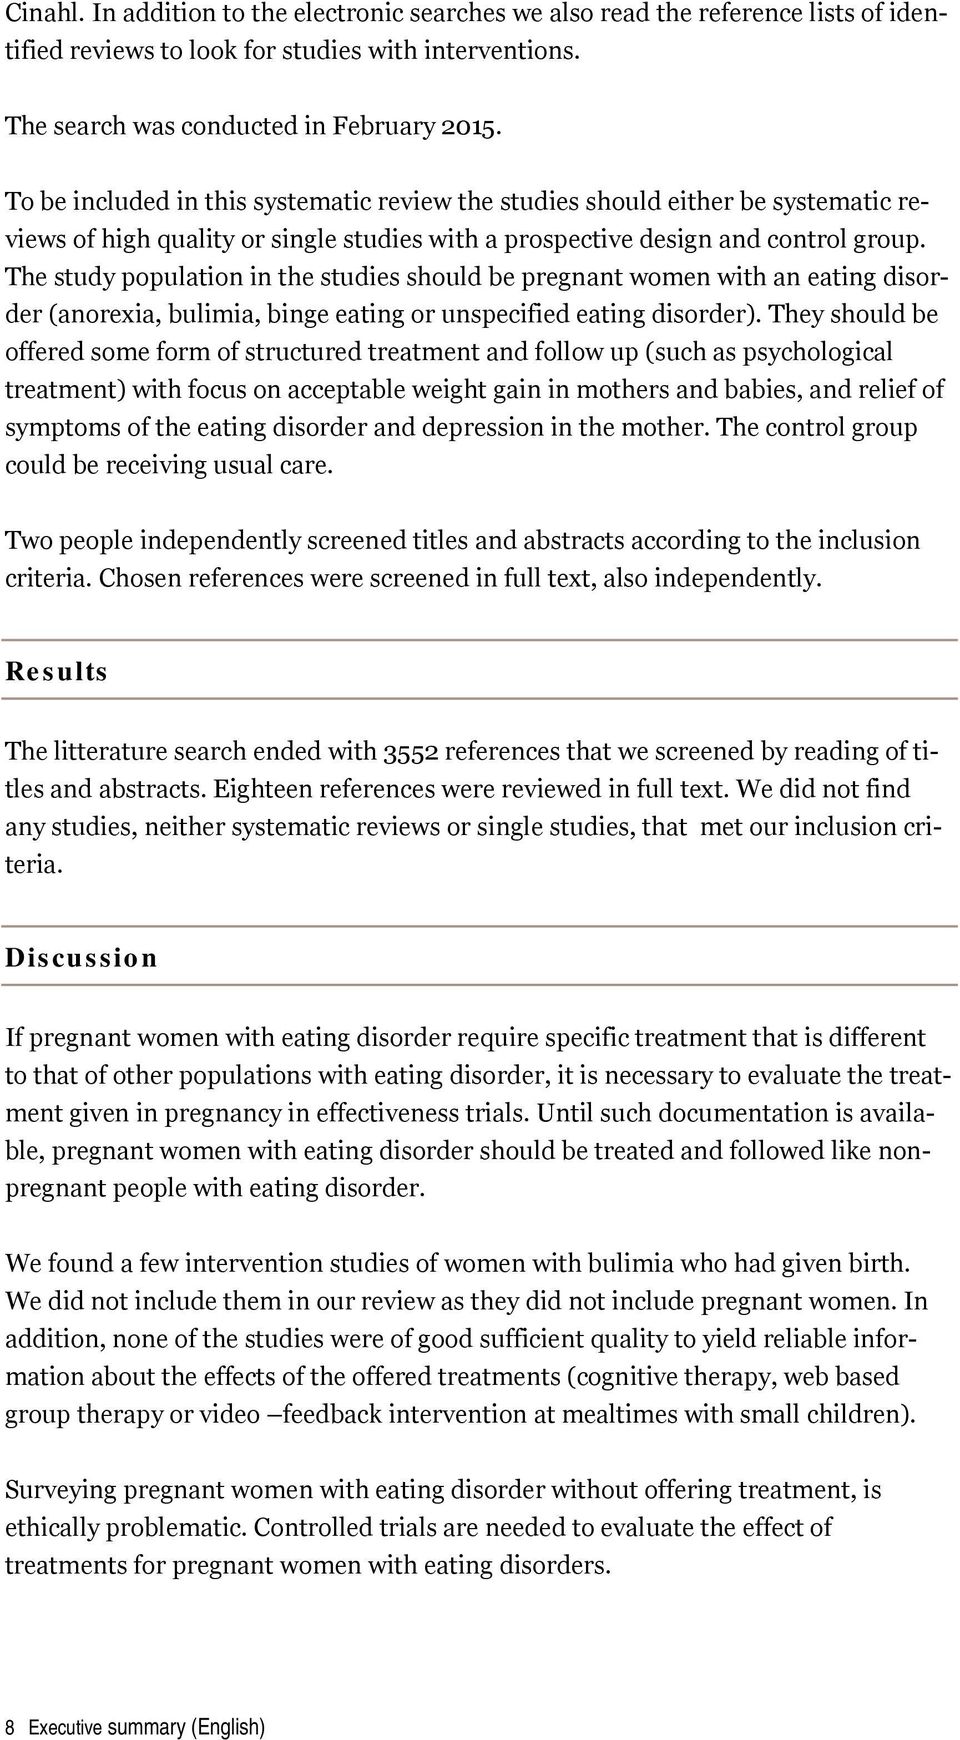 The study population in the studies should be pregnant women with an eating disorder (anorexia, bulimia, binge eating or unspecified eating disorder).